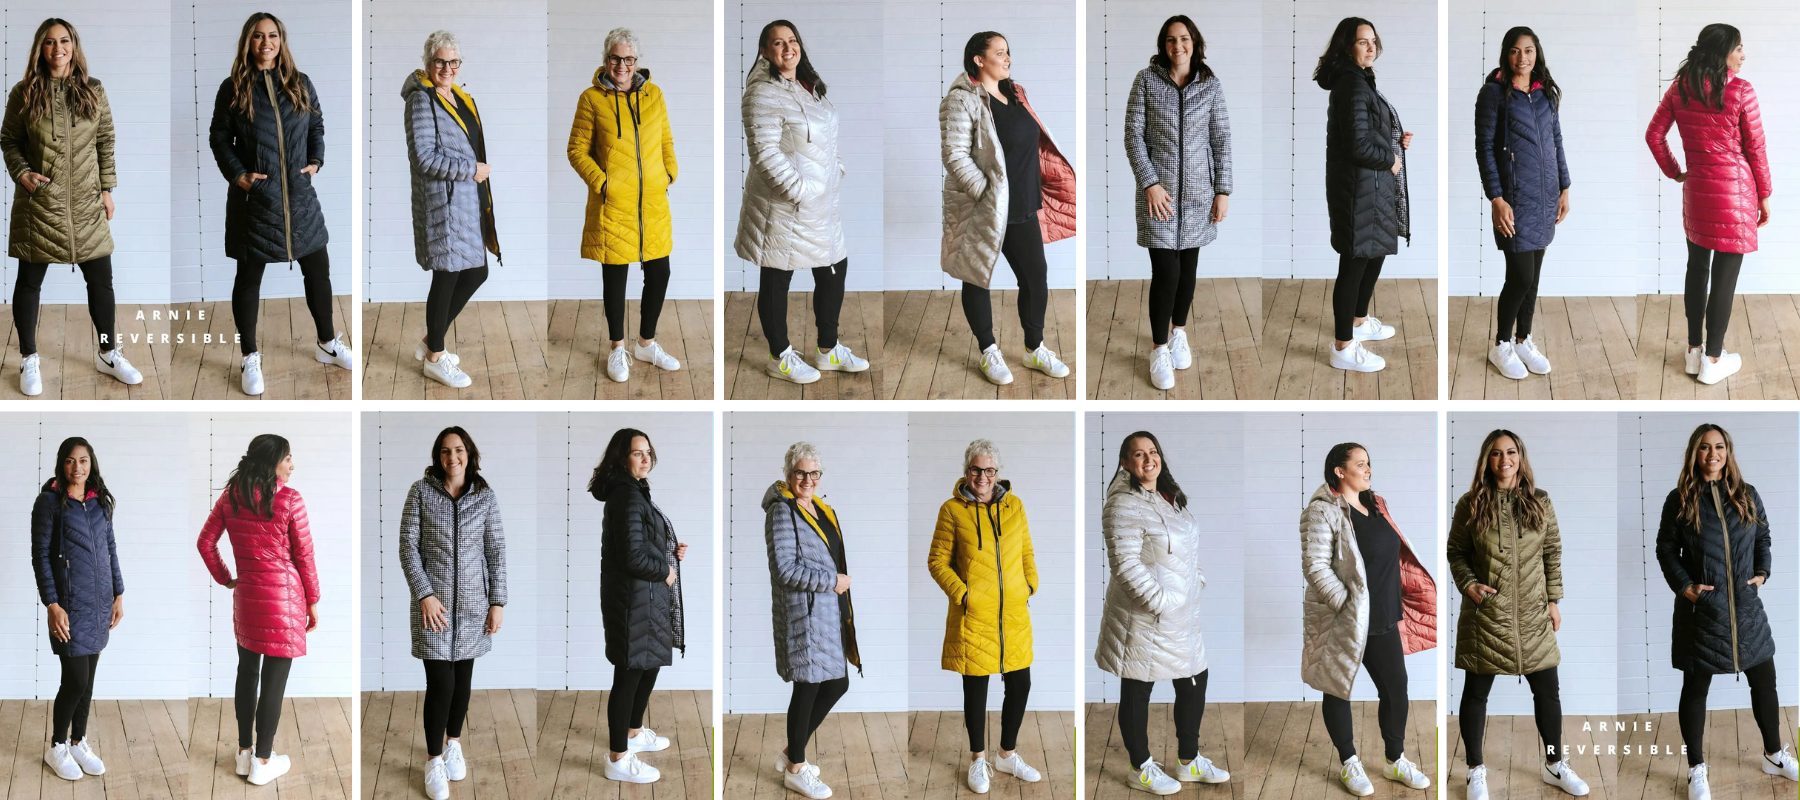 The Arnie Reversible Women's Coat gives you two coats in one.